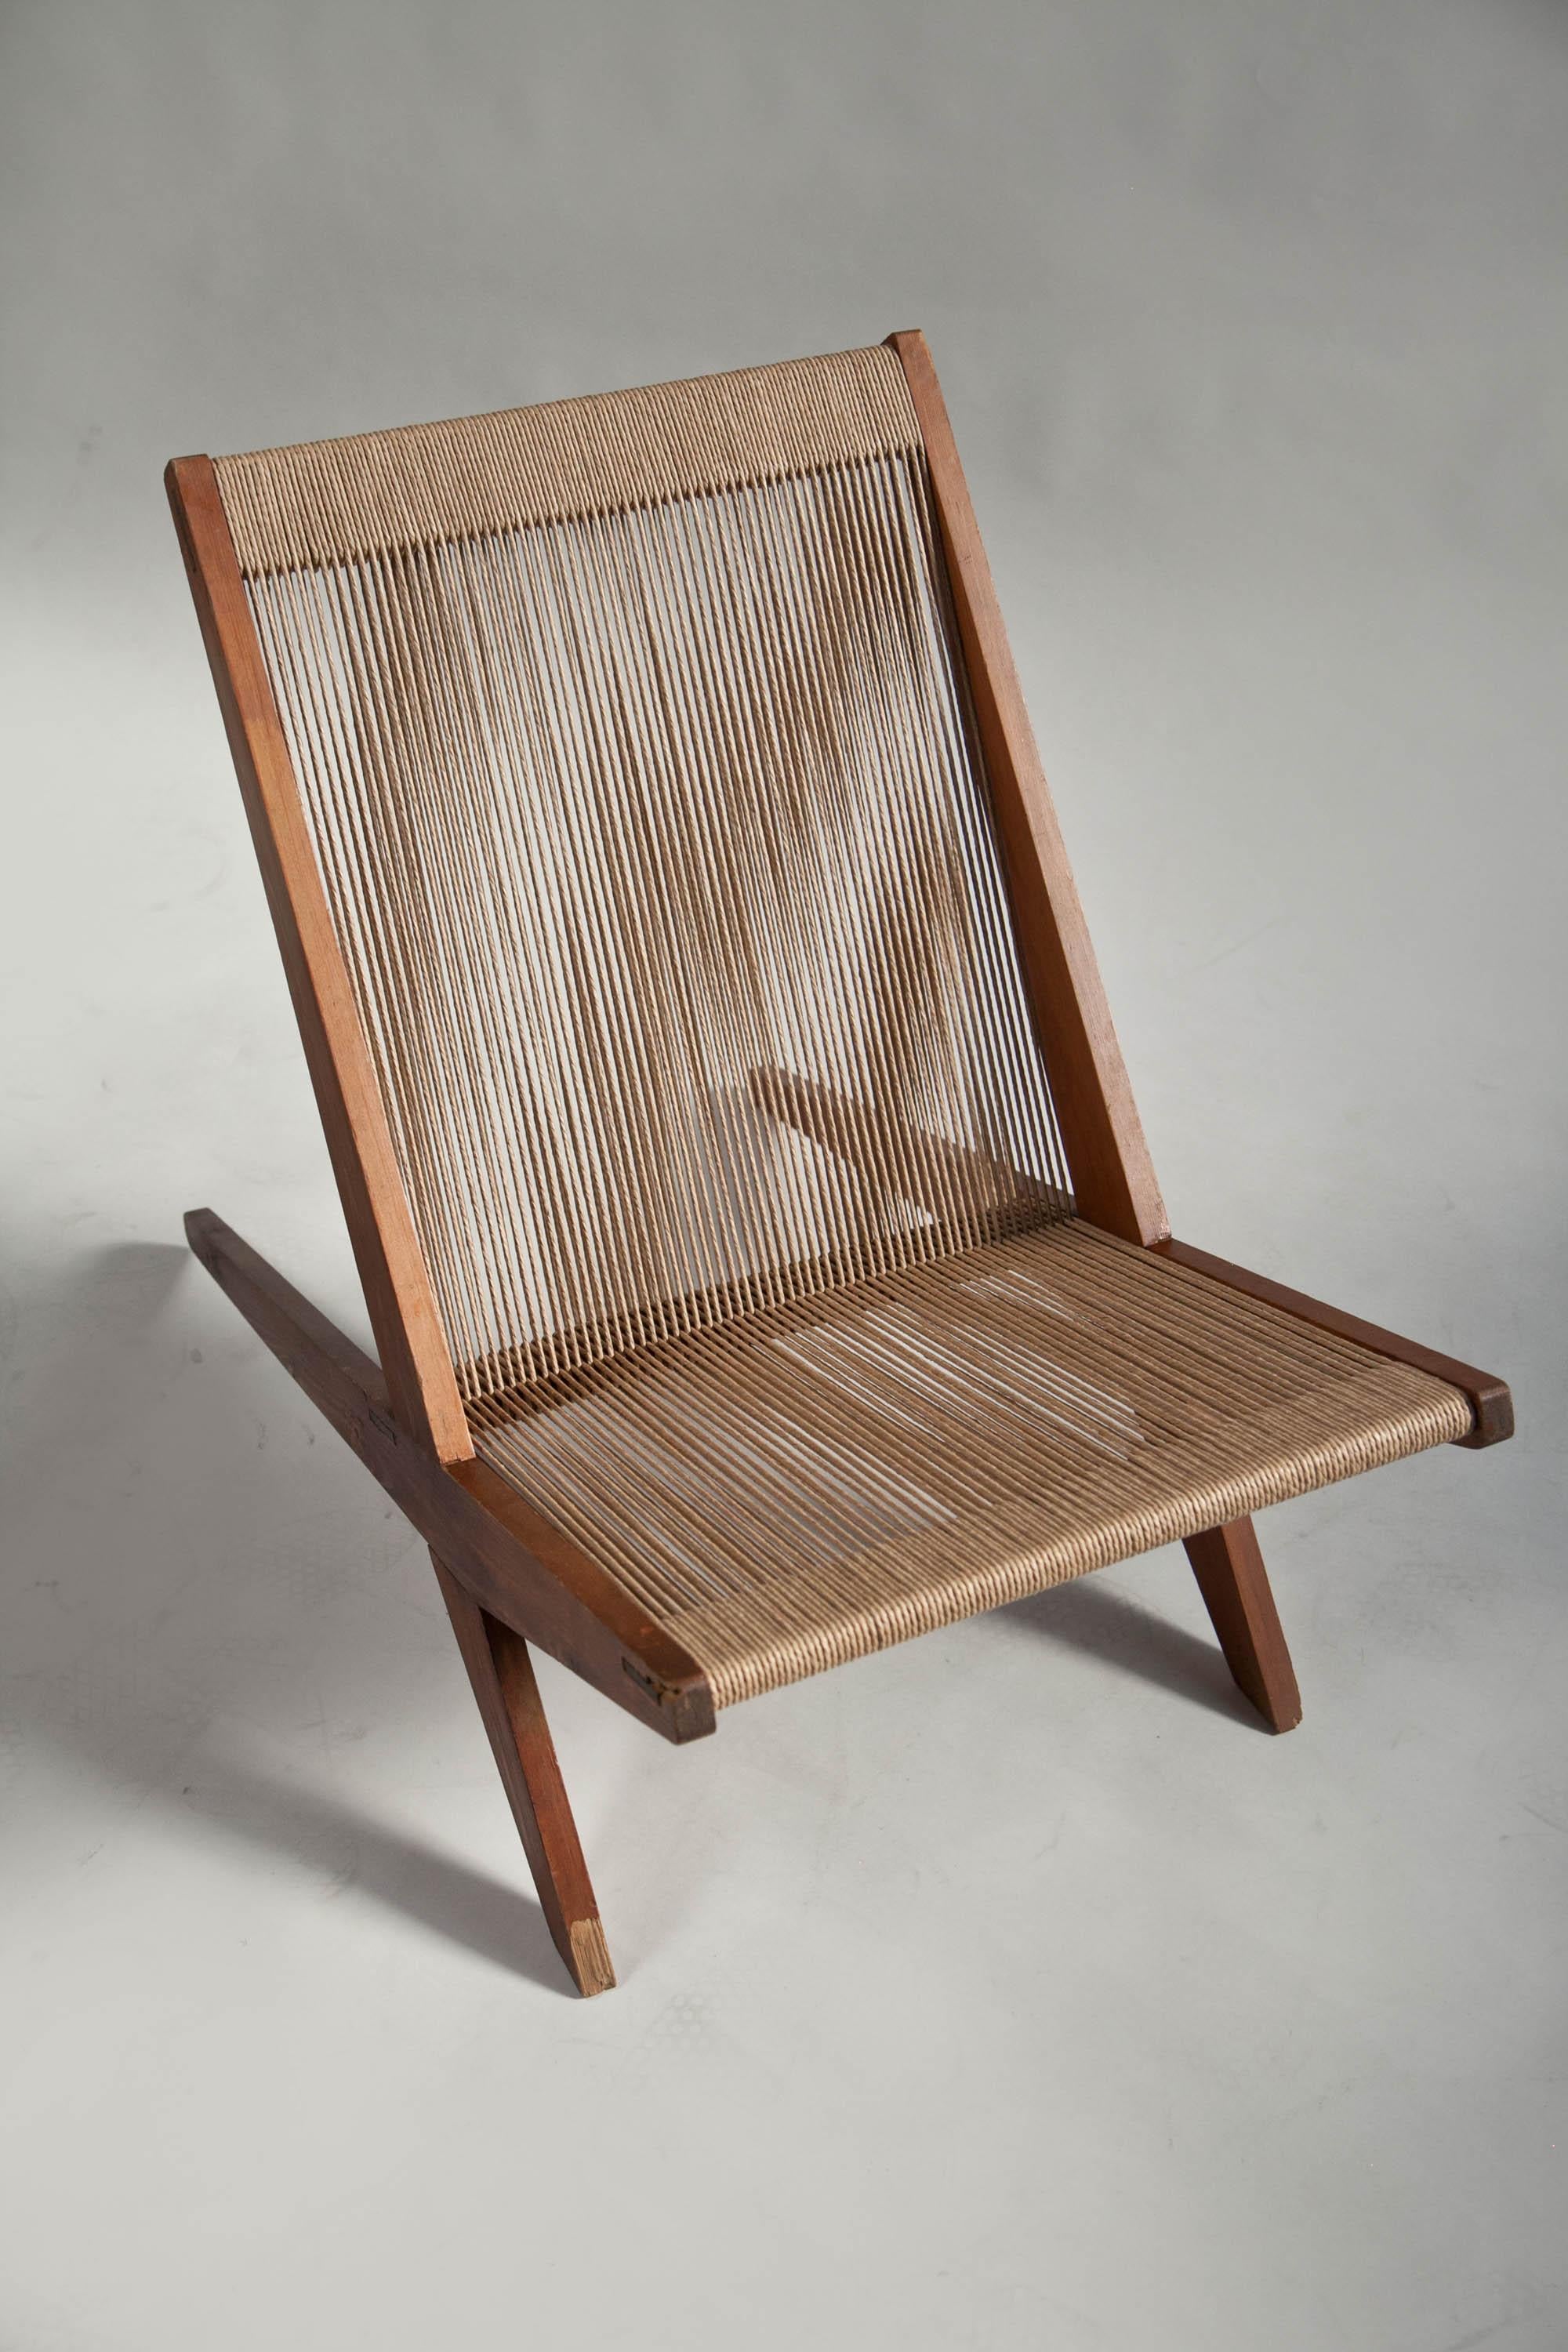 Rope Chair in Pine, Attributed to Poul Kjaerholm & Jørgen Høj, Denmark, 1960's In Fair Condition For Sale In Los Angeles, CA